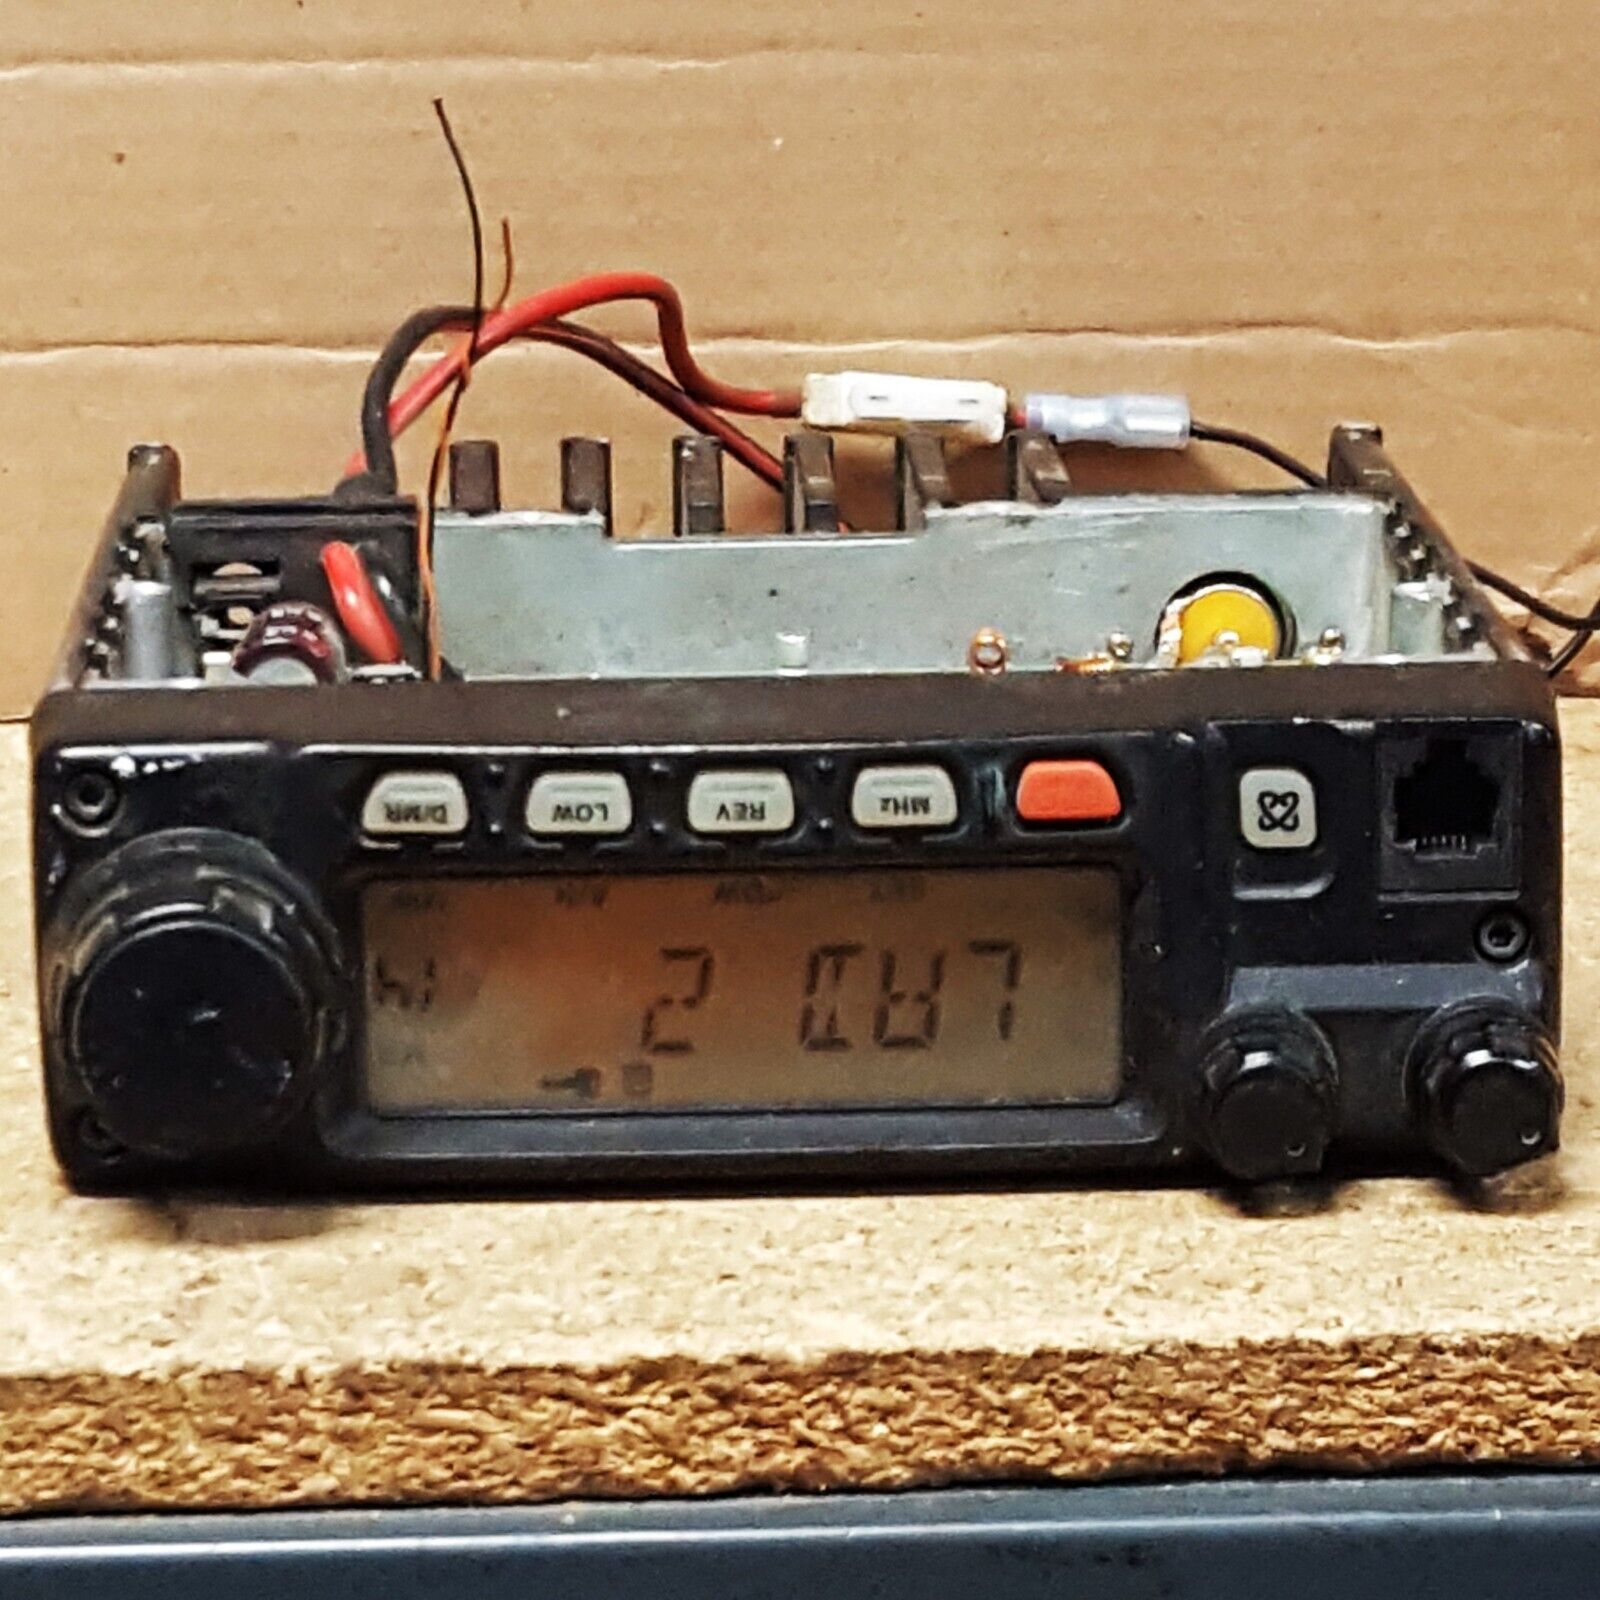 Yaesu FT-2800M FM-Transceiver - Missing Top Cover - Powers On -See Pix-For Parts. Available Now for $49.20